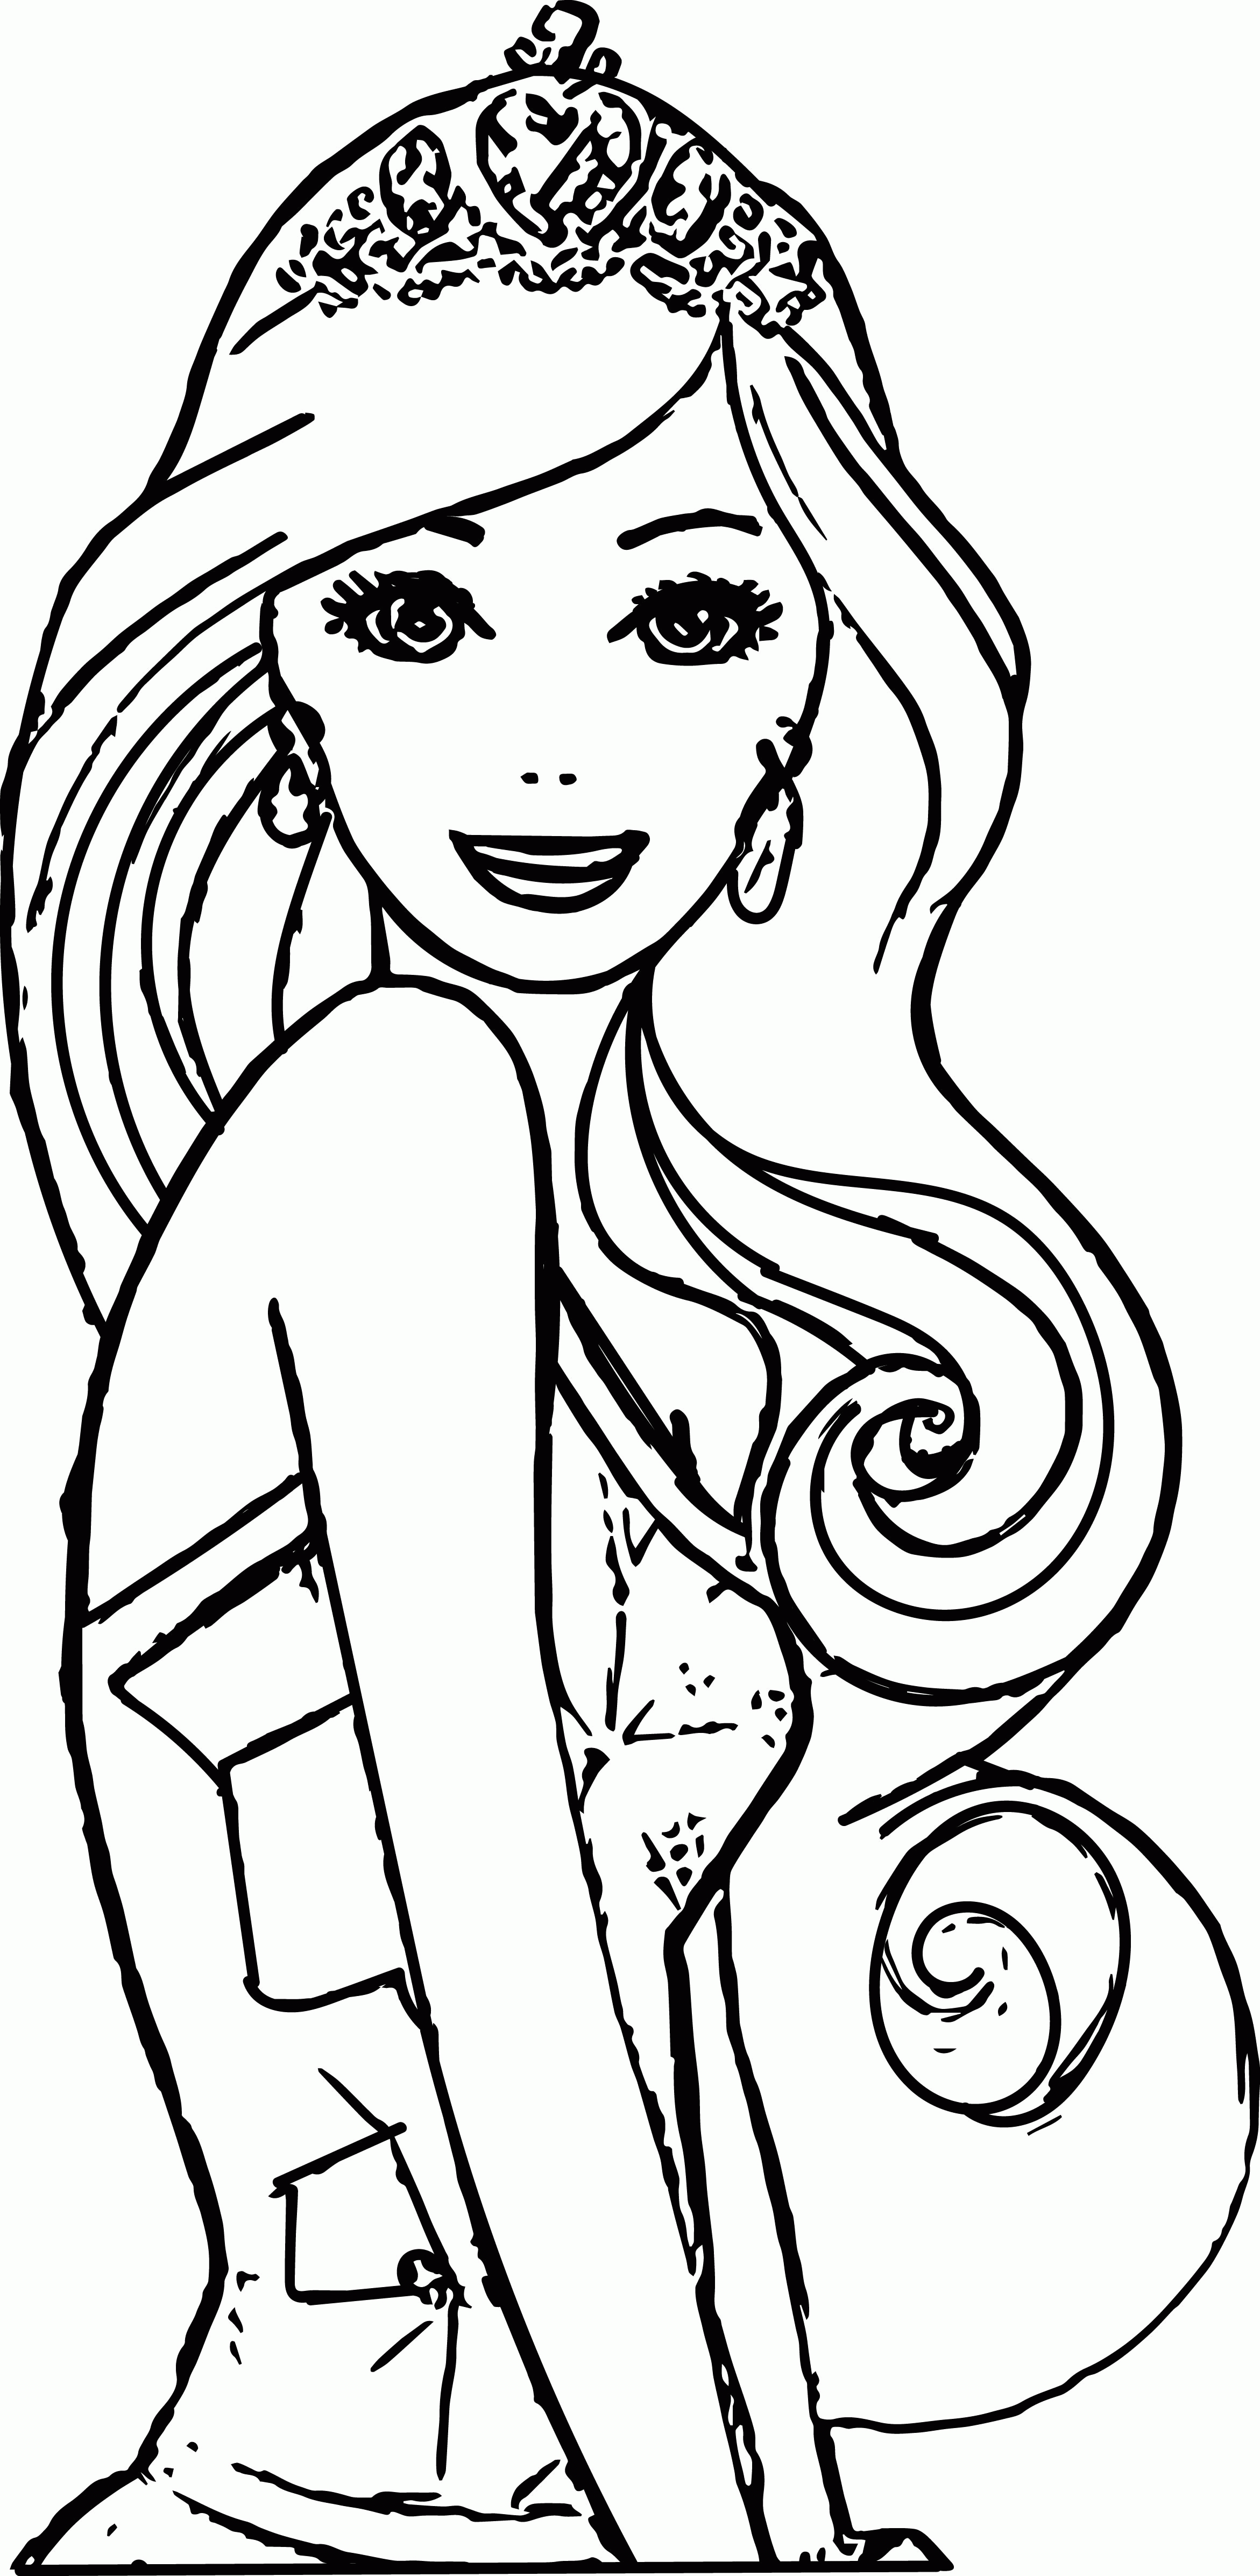 Barbie Face Coloring Page 01 | Wecoloringpage